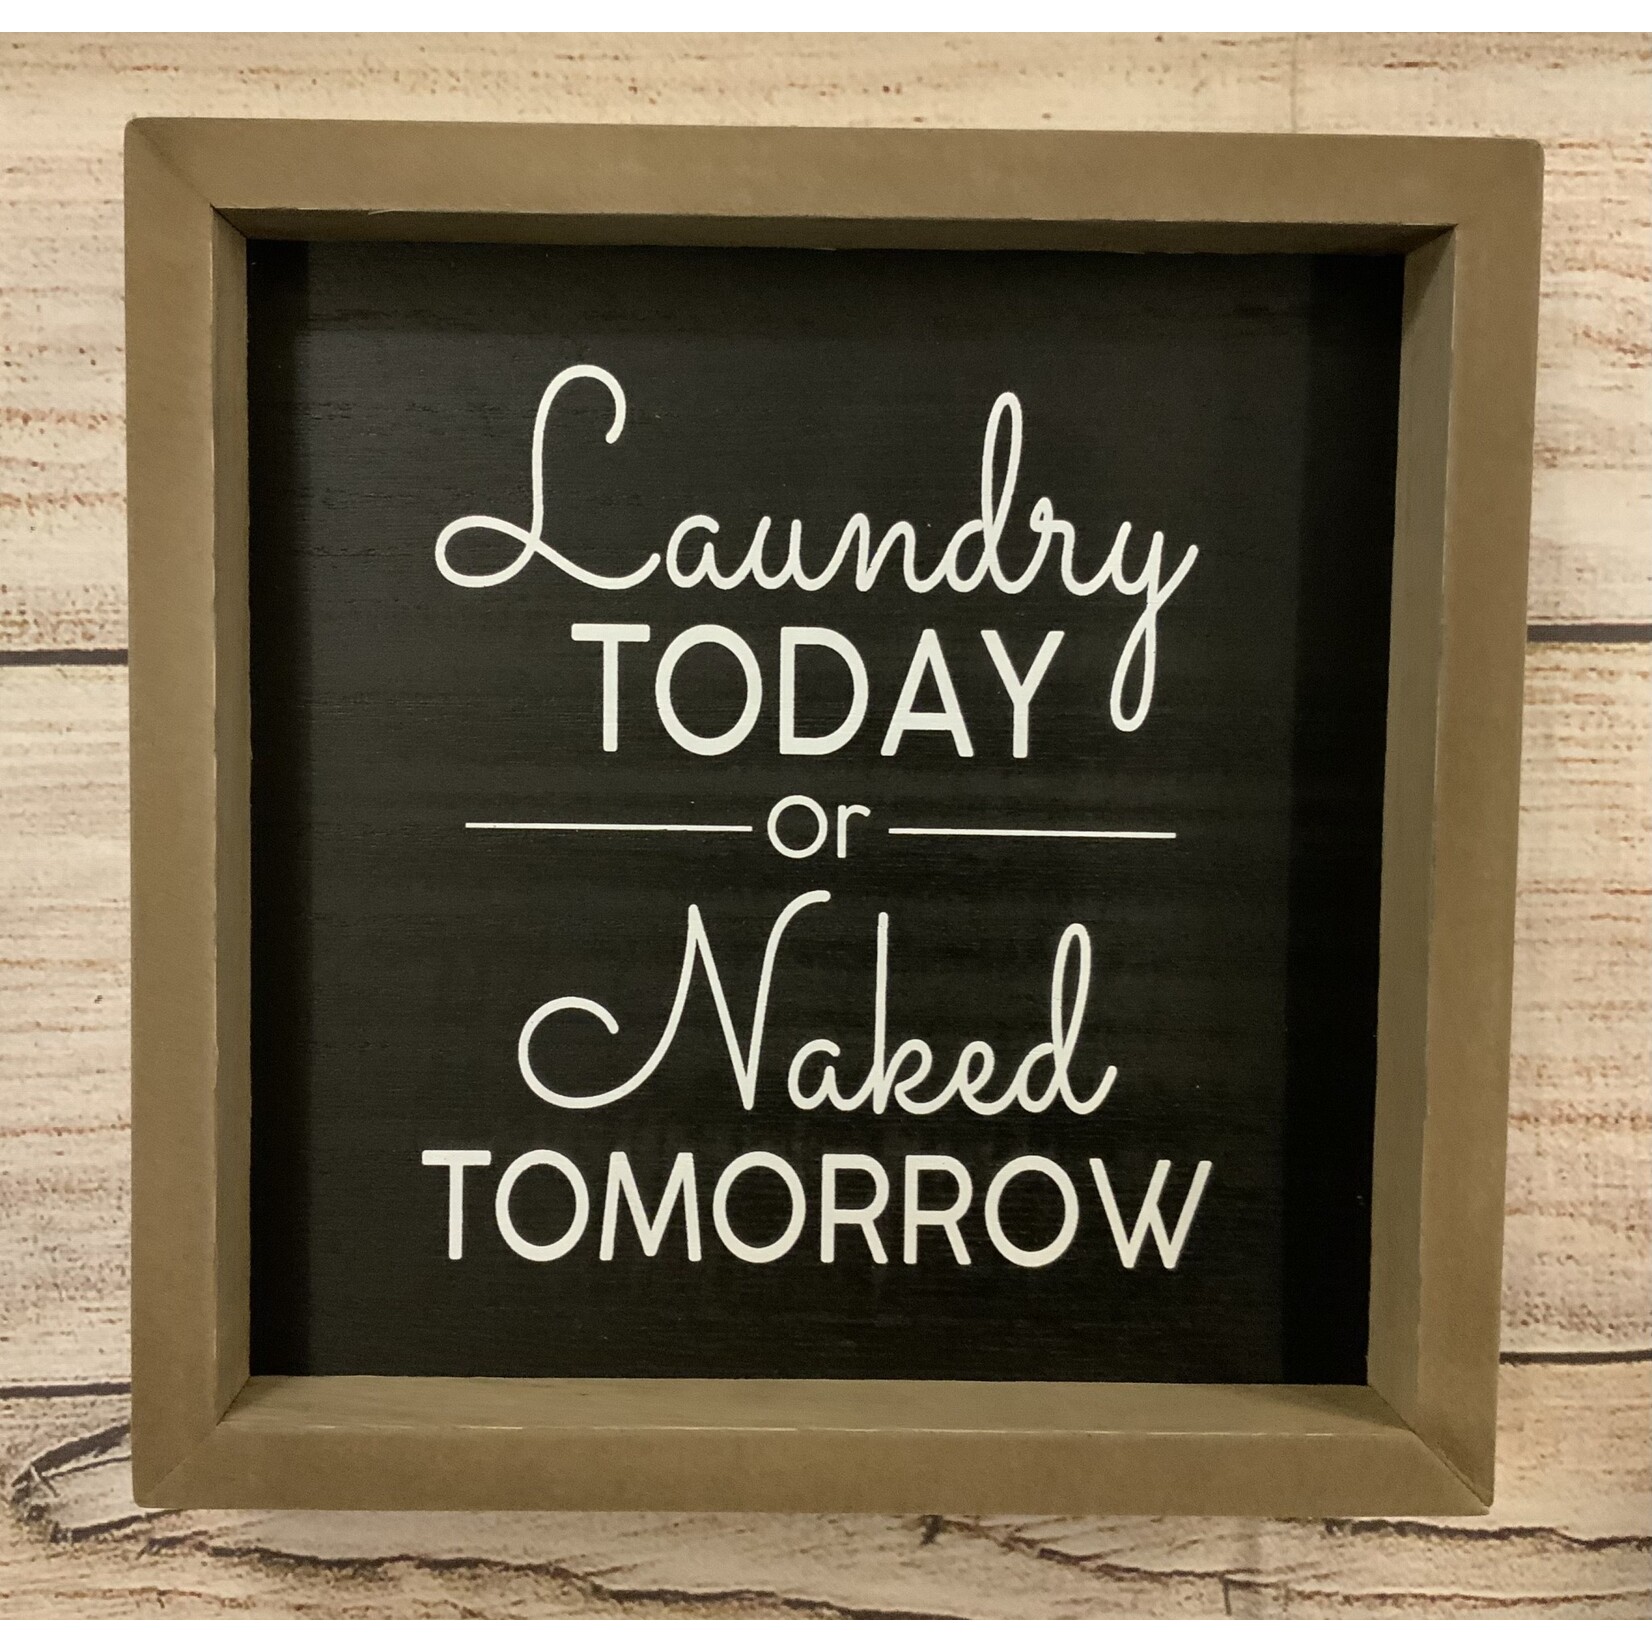 Gerson Laundry Box Sign